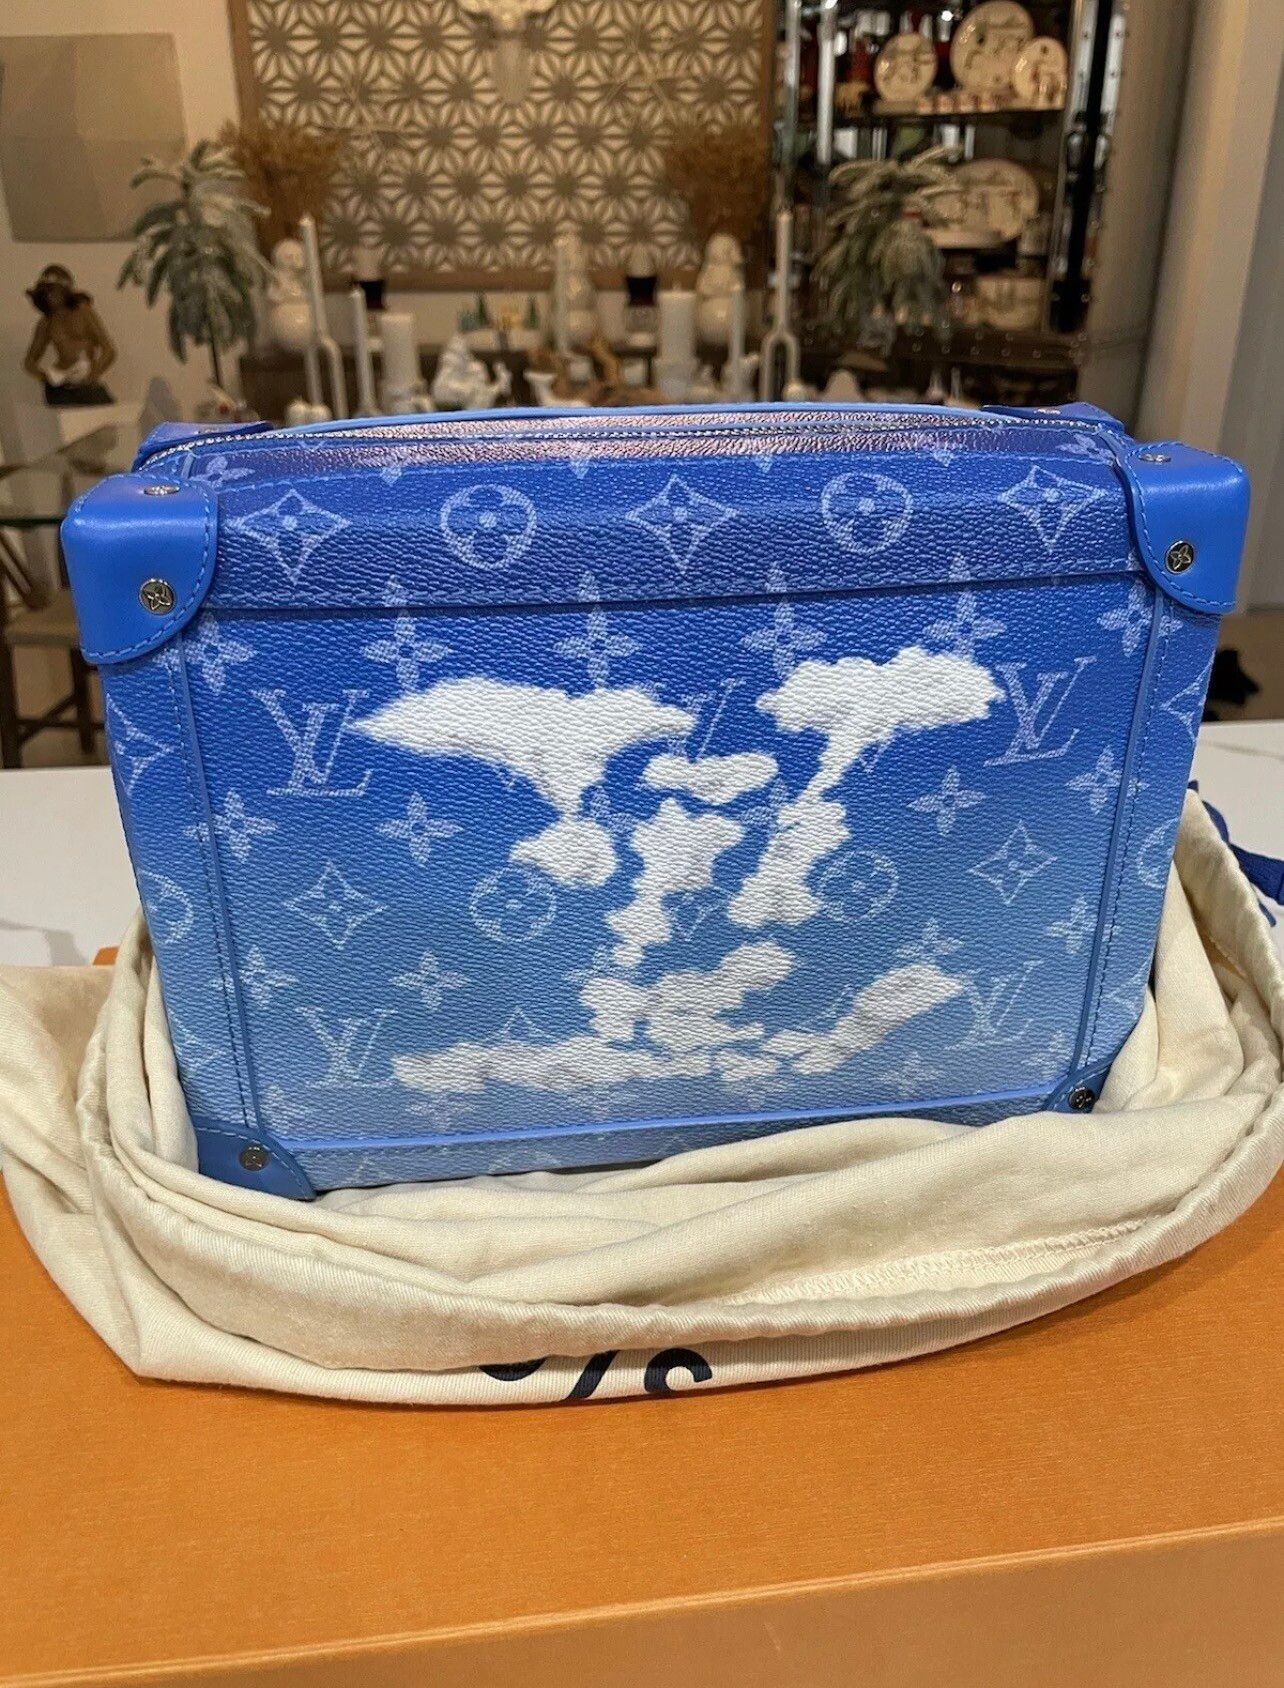 Louis Vuitton Cloud Trunk - For Sale on 1stDibs